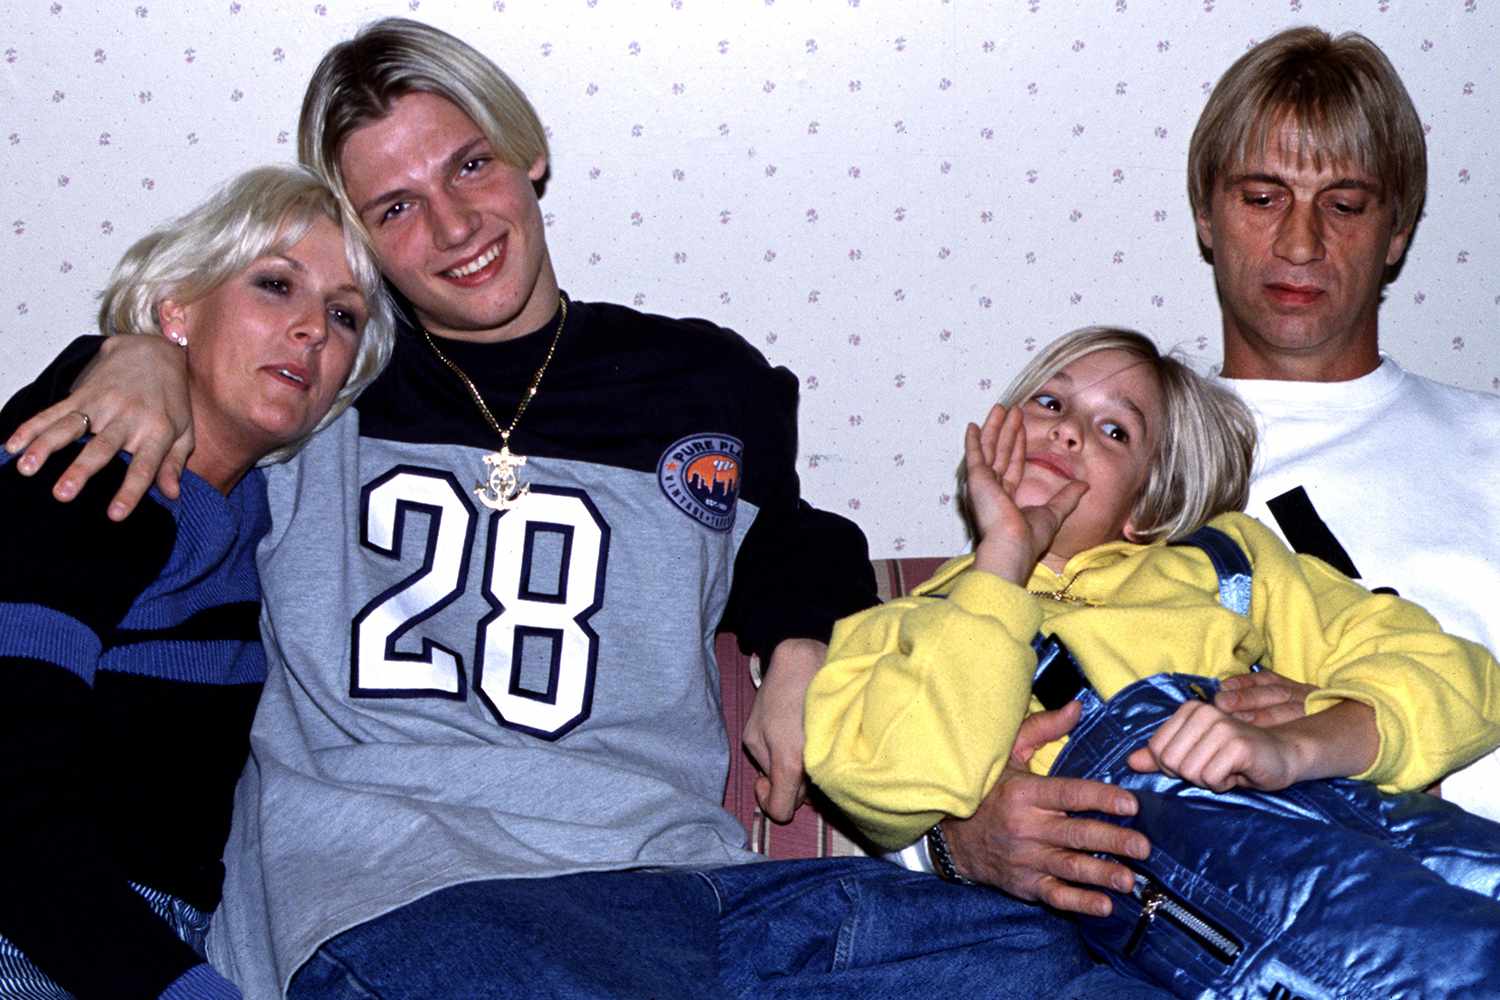 ...Friend Reveals How Mom Jane Tried to 'Divide' Her Sons After Leslie's Death: 'He Doesn't Love You'